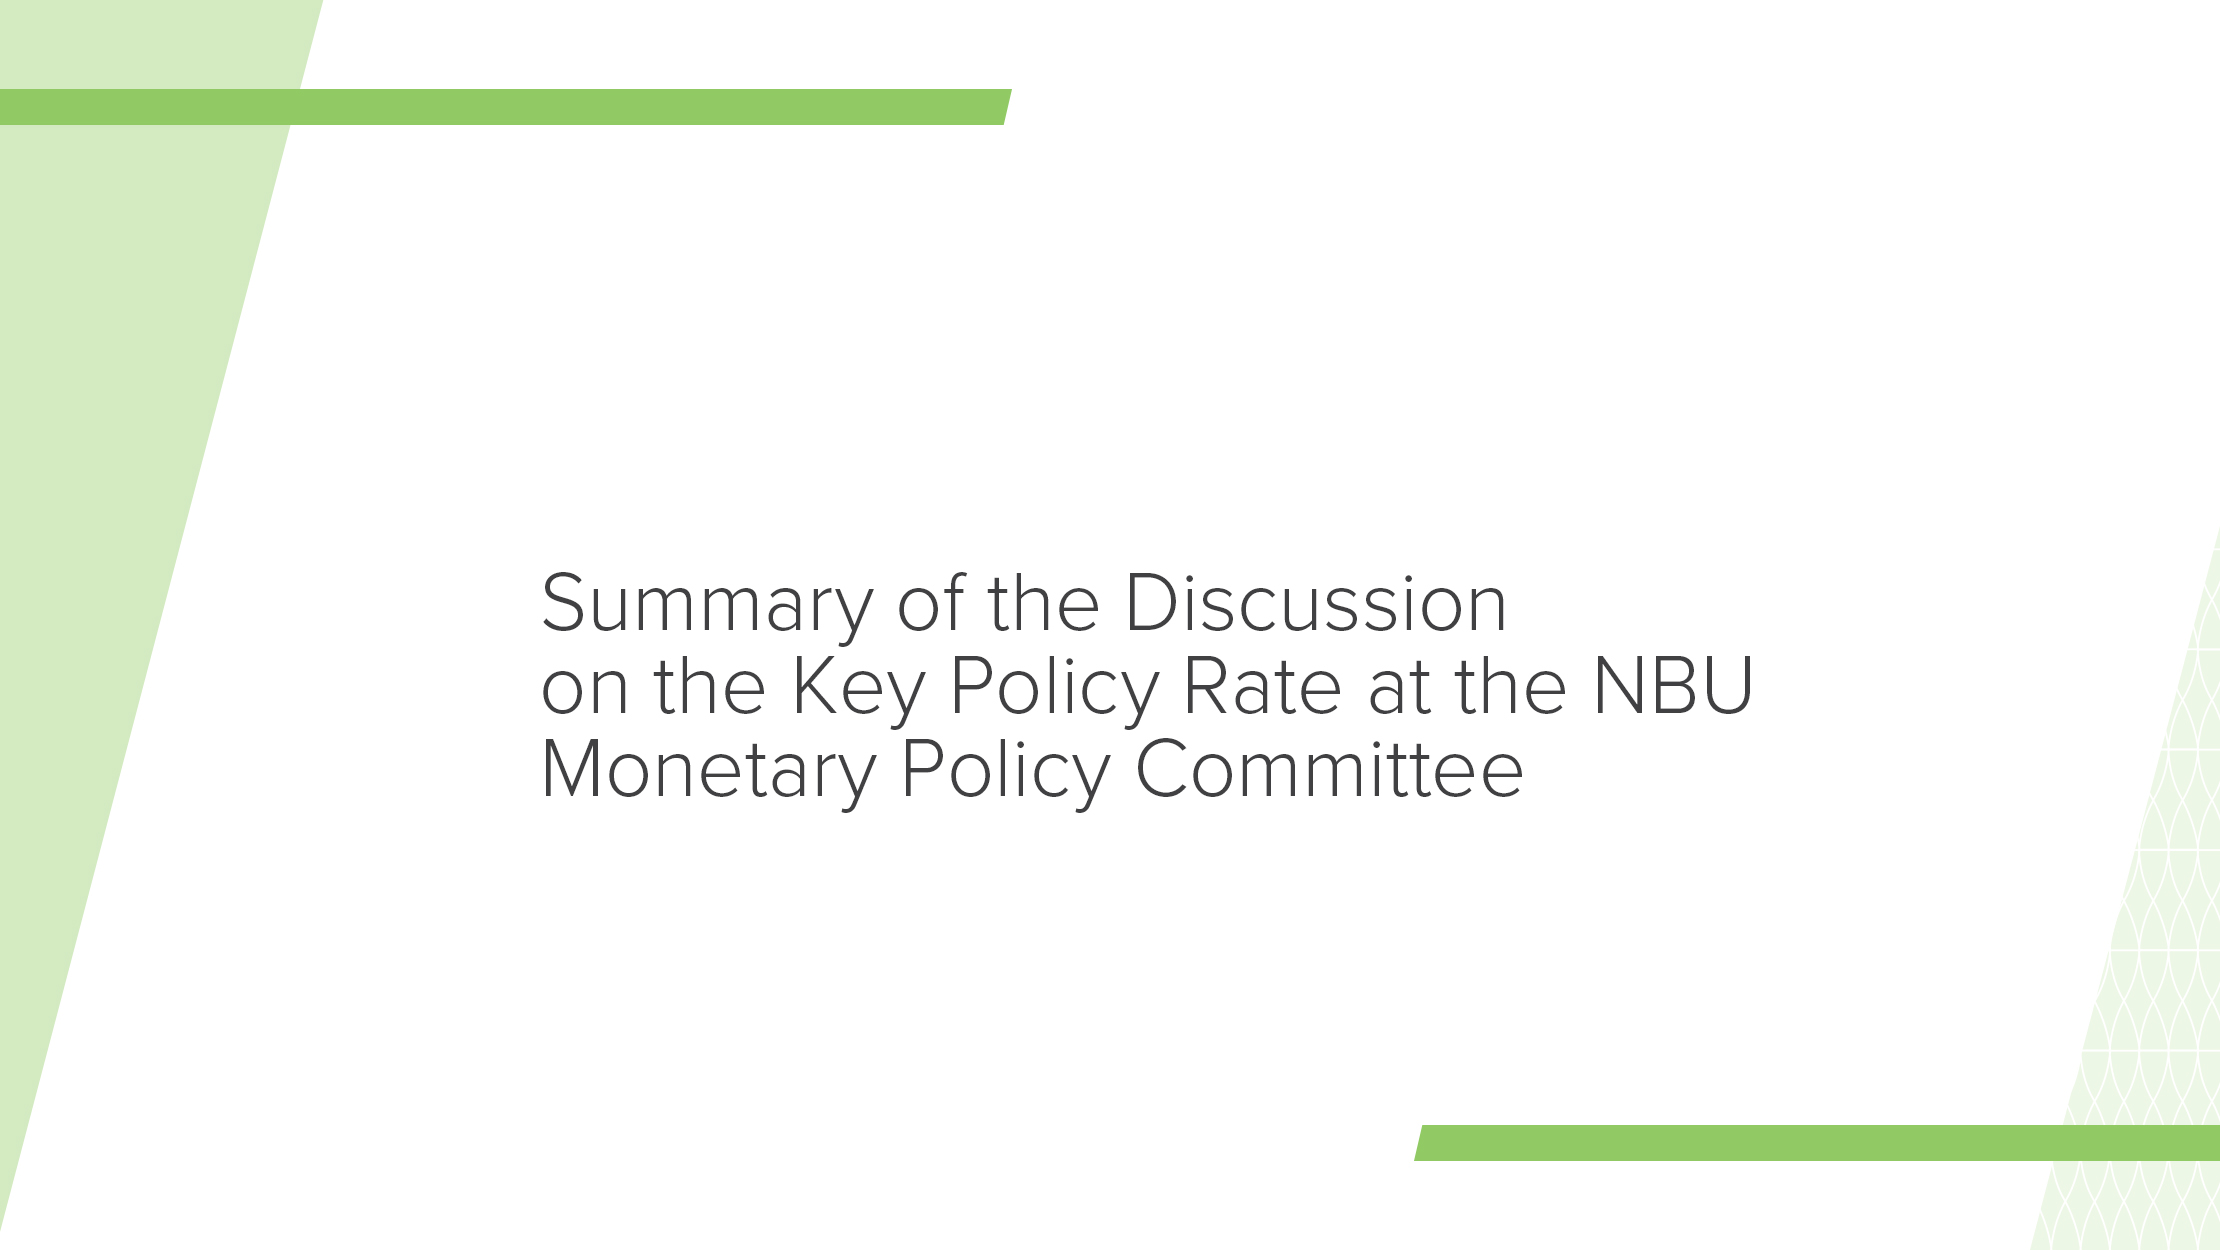 Summary of Key Policy Rate Discussion by NBU Monetary Policy Committee on 7 December 2022